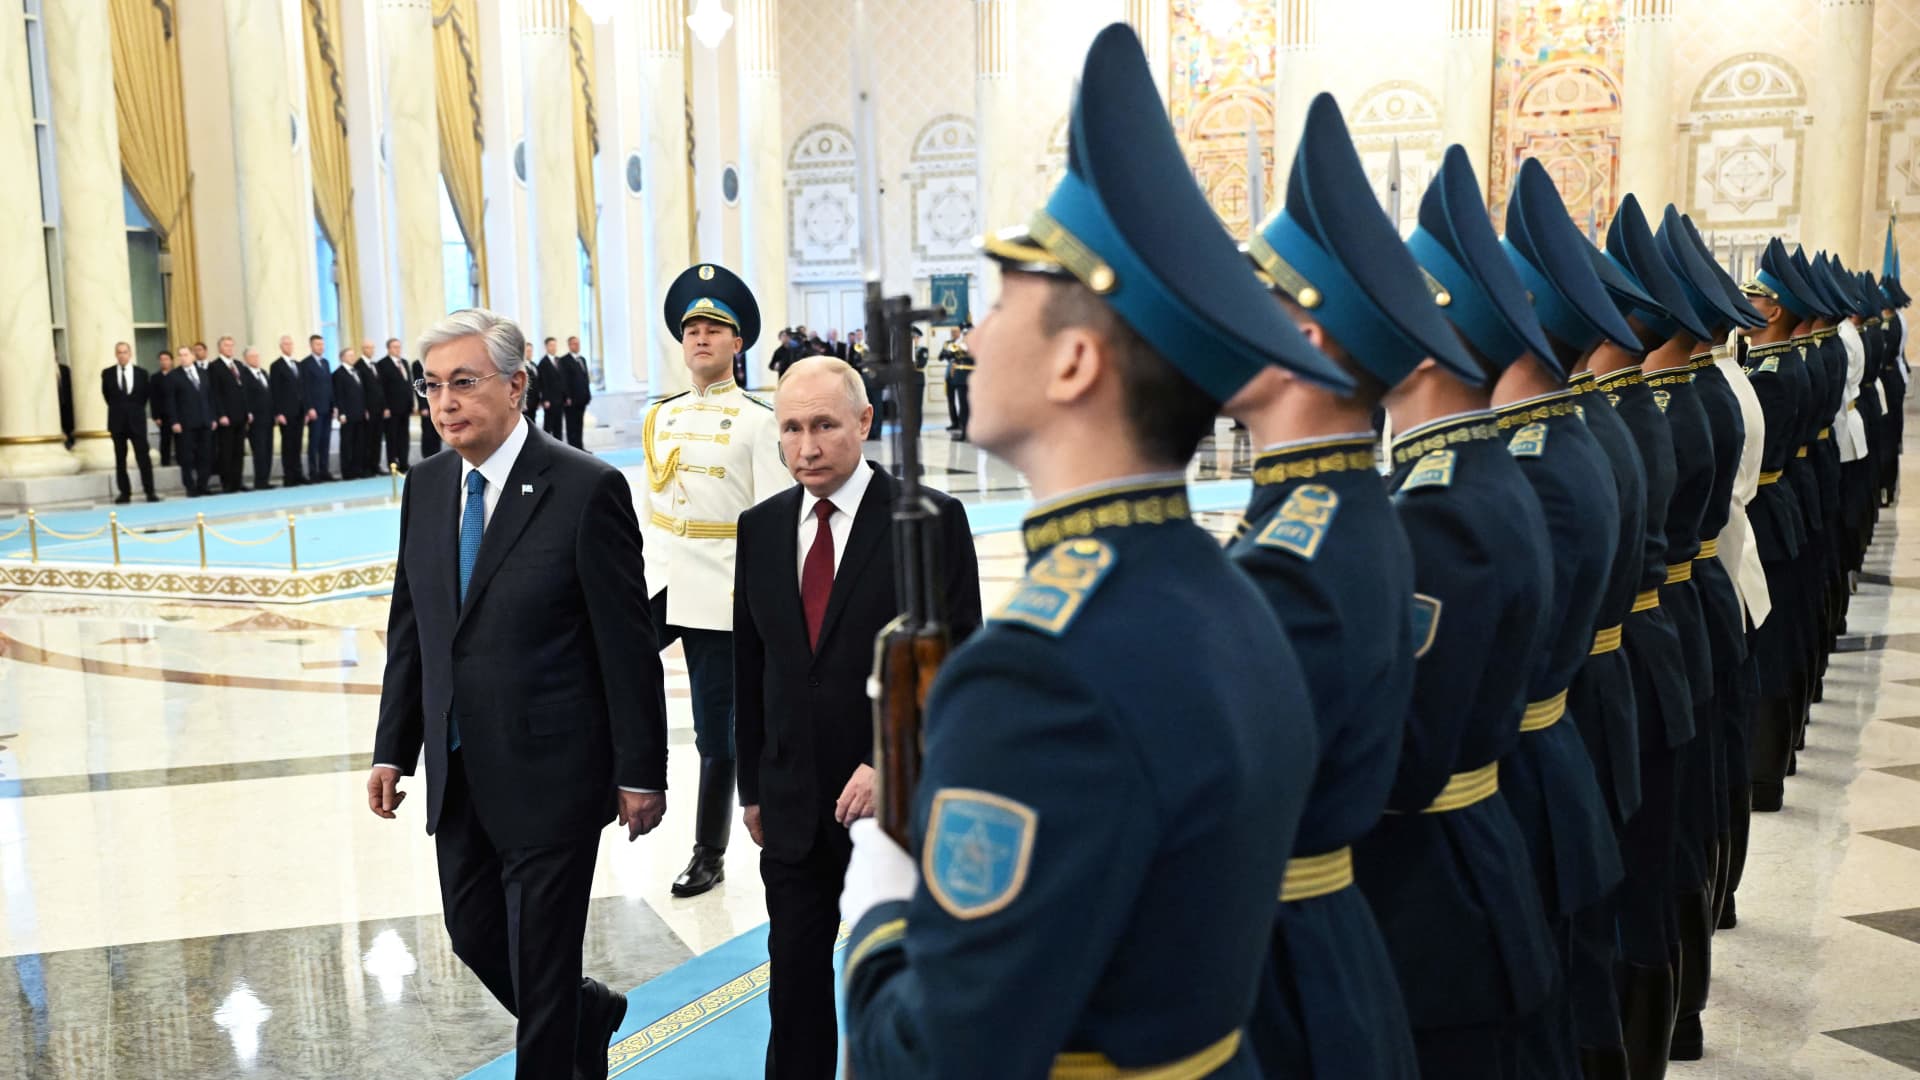 This pool photograph distributed by Russian state agency Sputnik shows Kazakhstan's President Kassym-Jomart Tokayev (L) and Russia's president Vladimir Putin (C) inspecting a guard of honour during a welcoming ceremony in Astana on November 9, 2023, as part of Putin's official visit to Kazakhstan. (Photo by Pavel BEDNYAKOV / POOL / AFP) (Photo by PAVEL BEDNYAKOV/POOL/AFP via Getty Images)